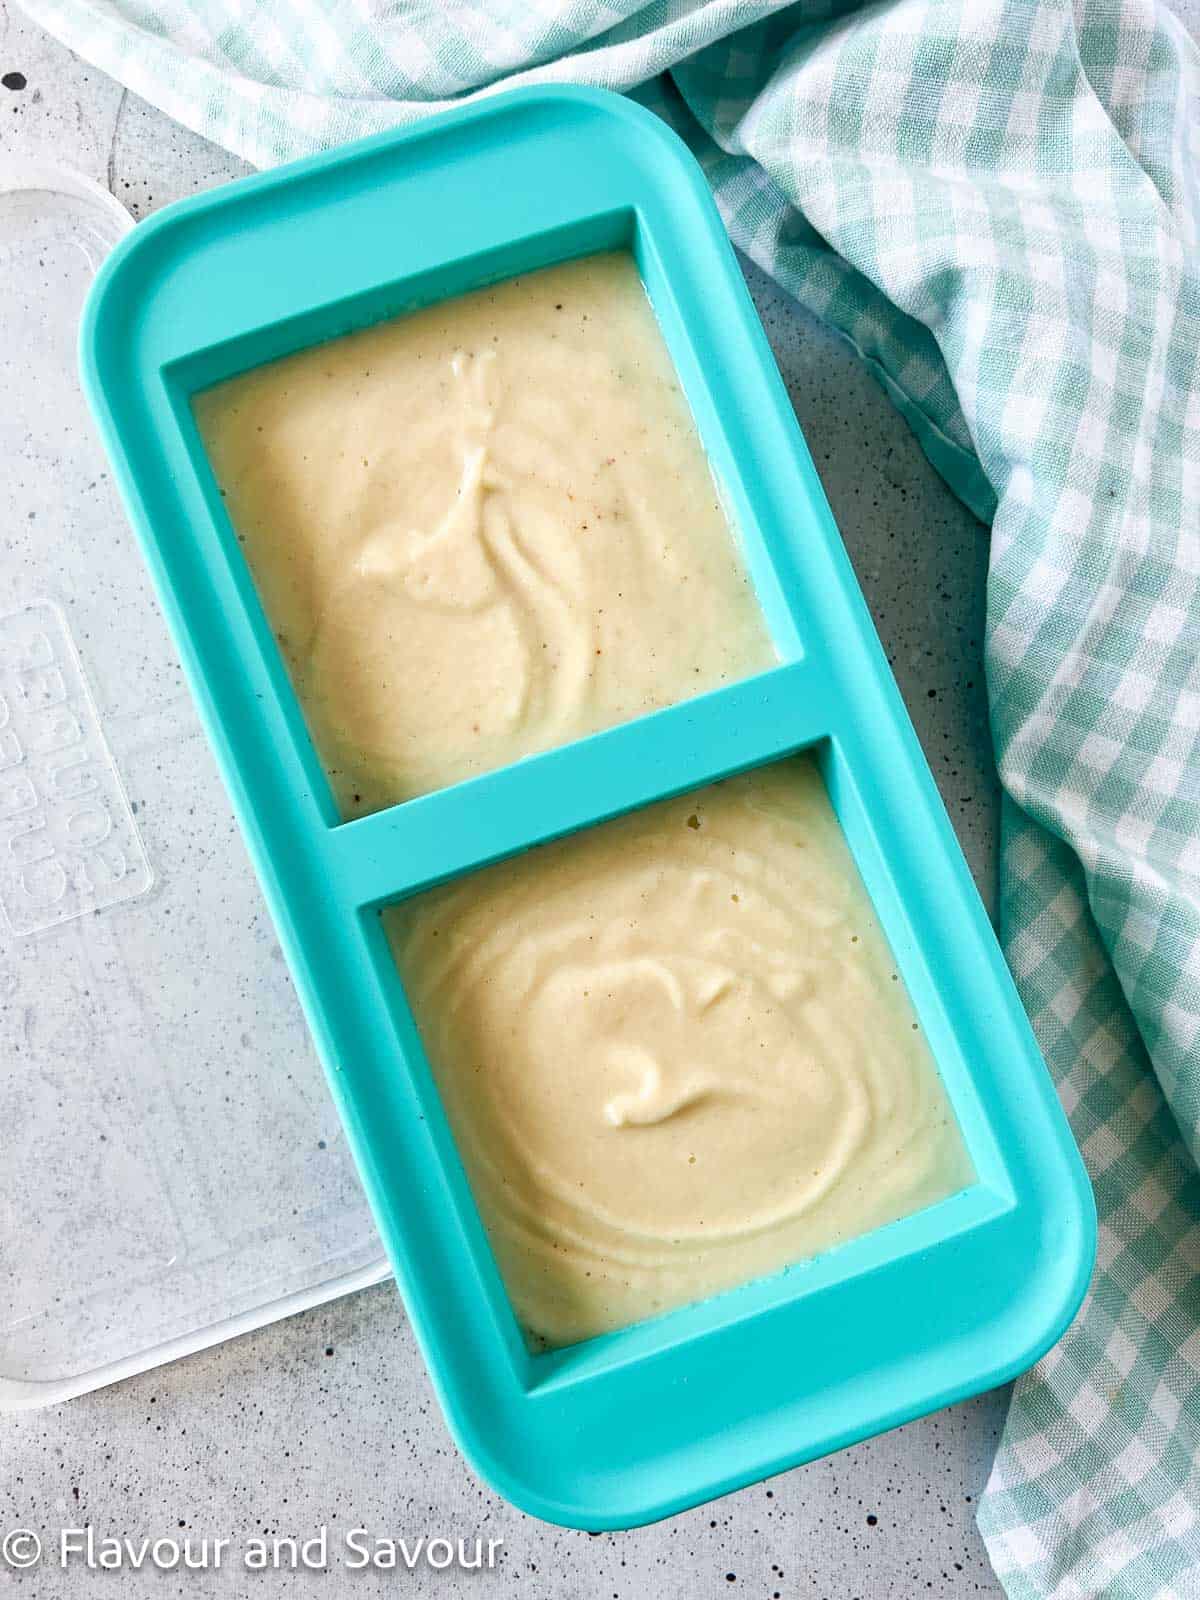 Cauliflower soup in a Souper Cube ready to freeze.